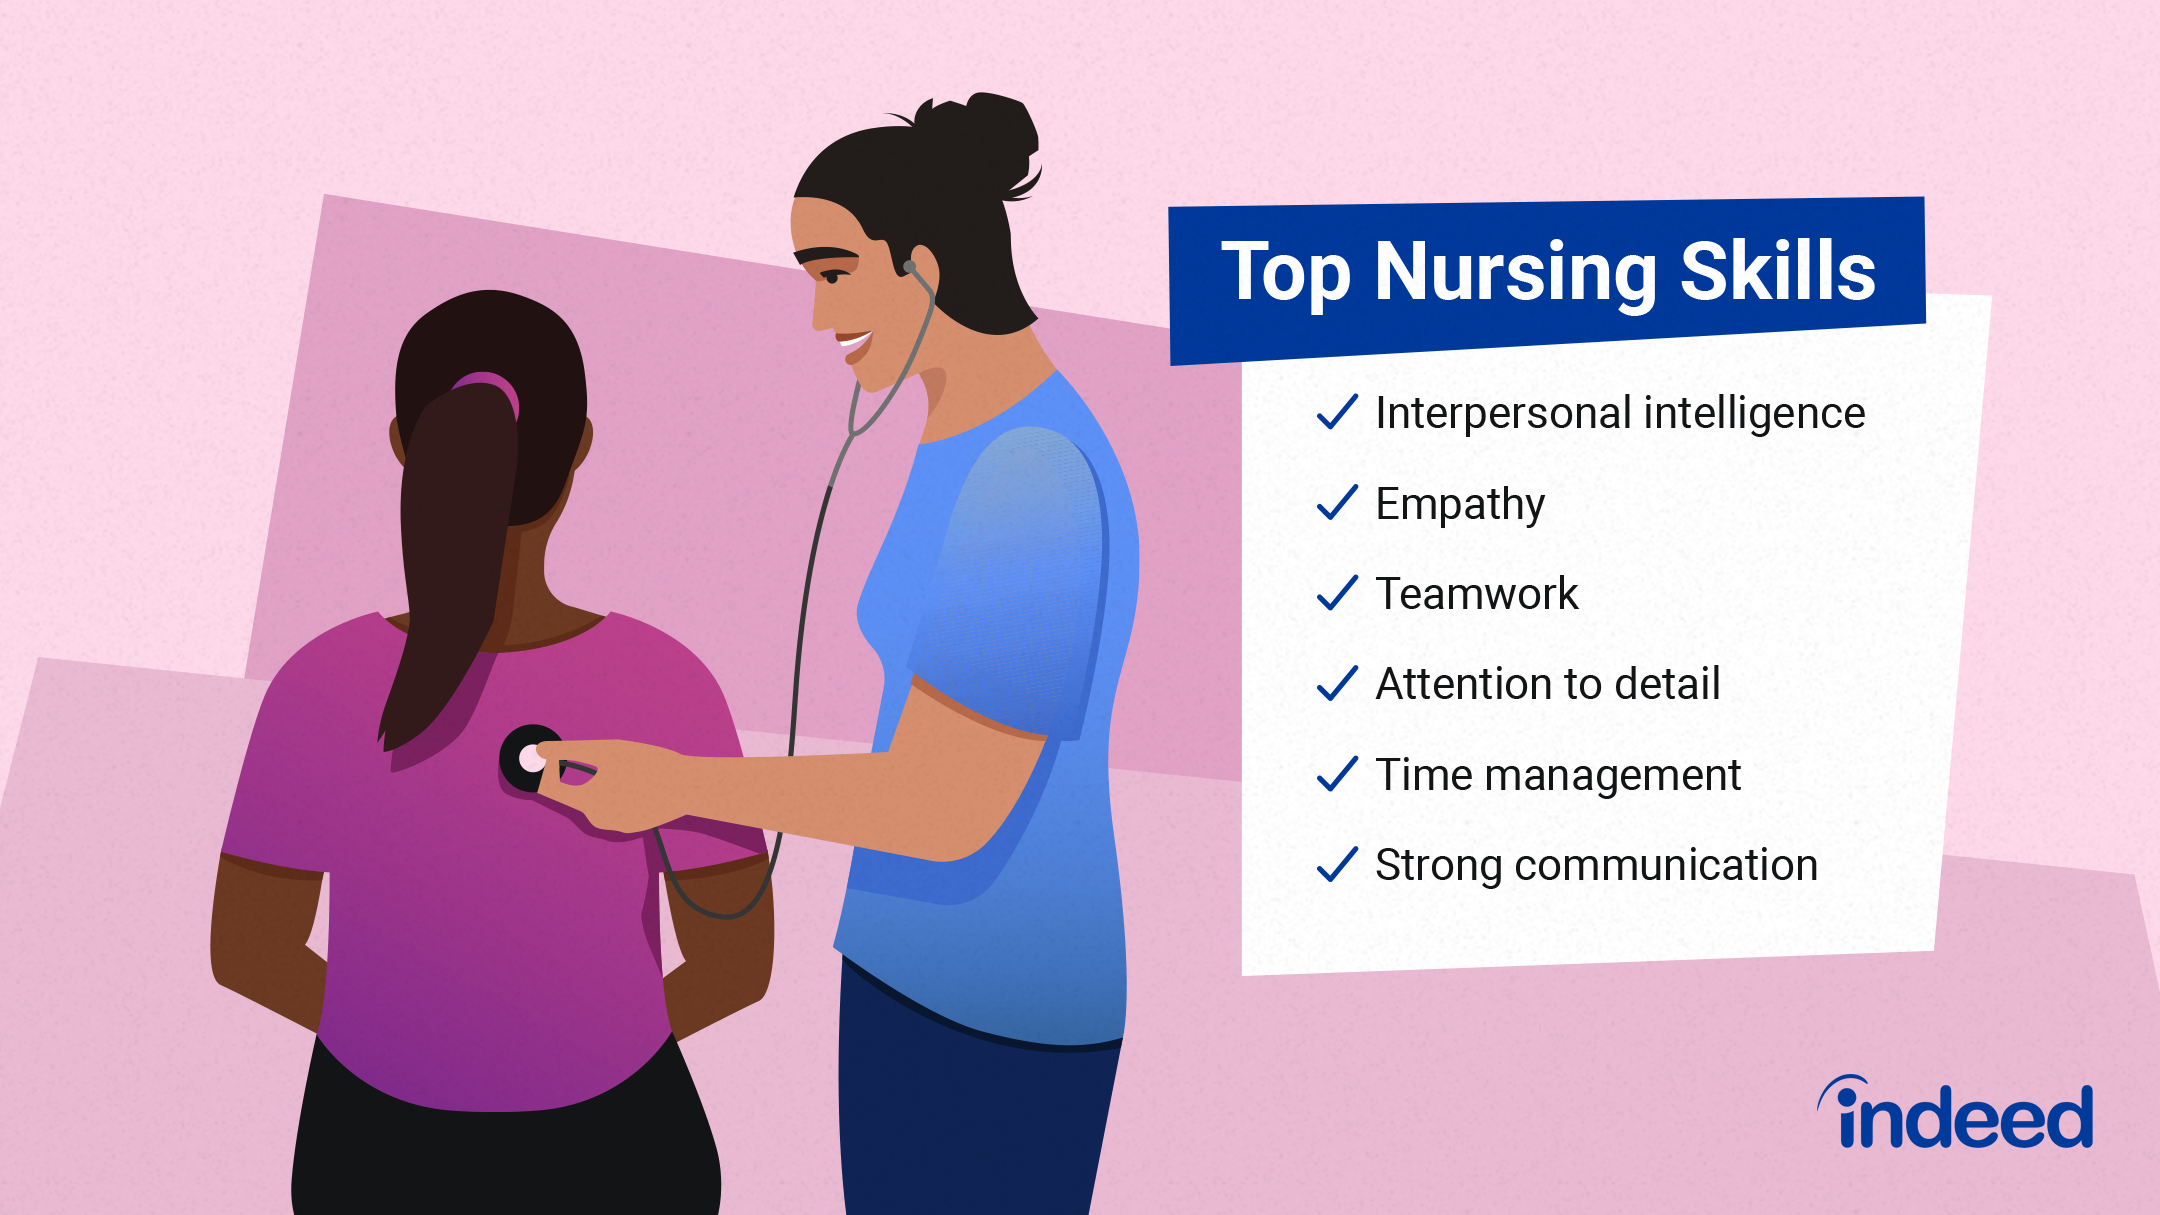 15 Essential Nursing Skills To Include on Your Resume